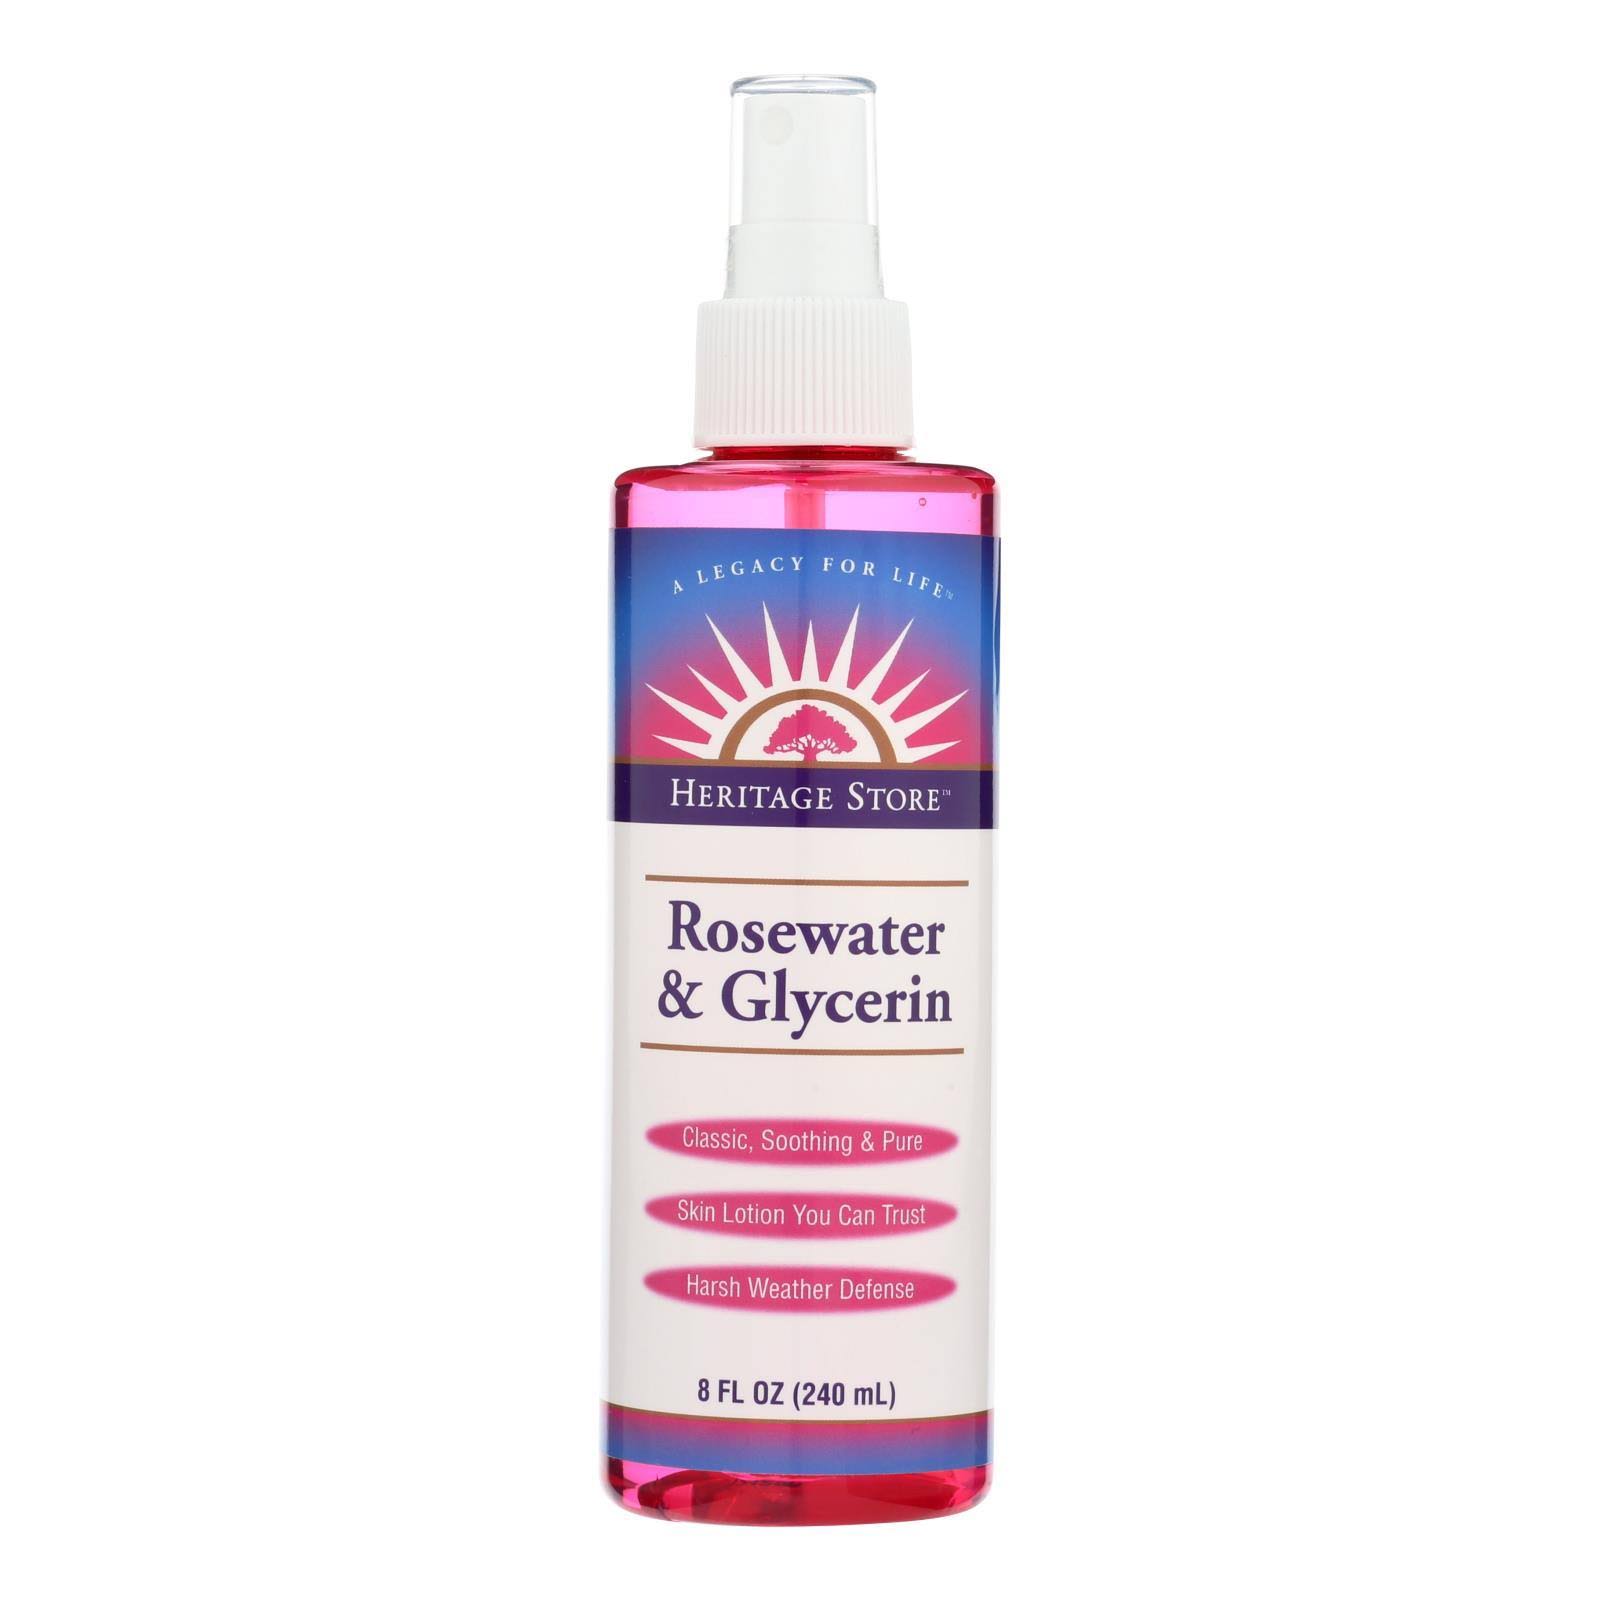 Heritage Store Rosewater & Glycerin - 240ml